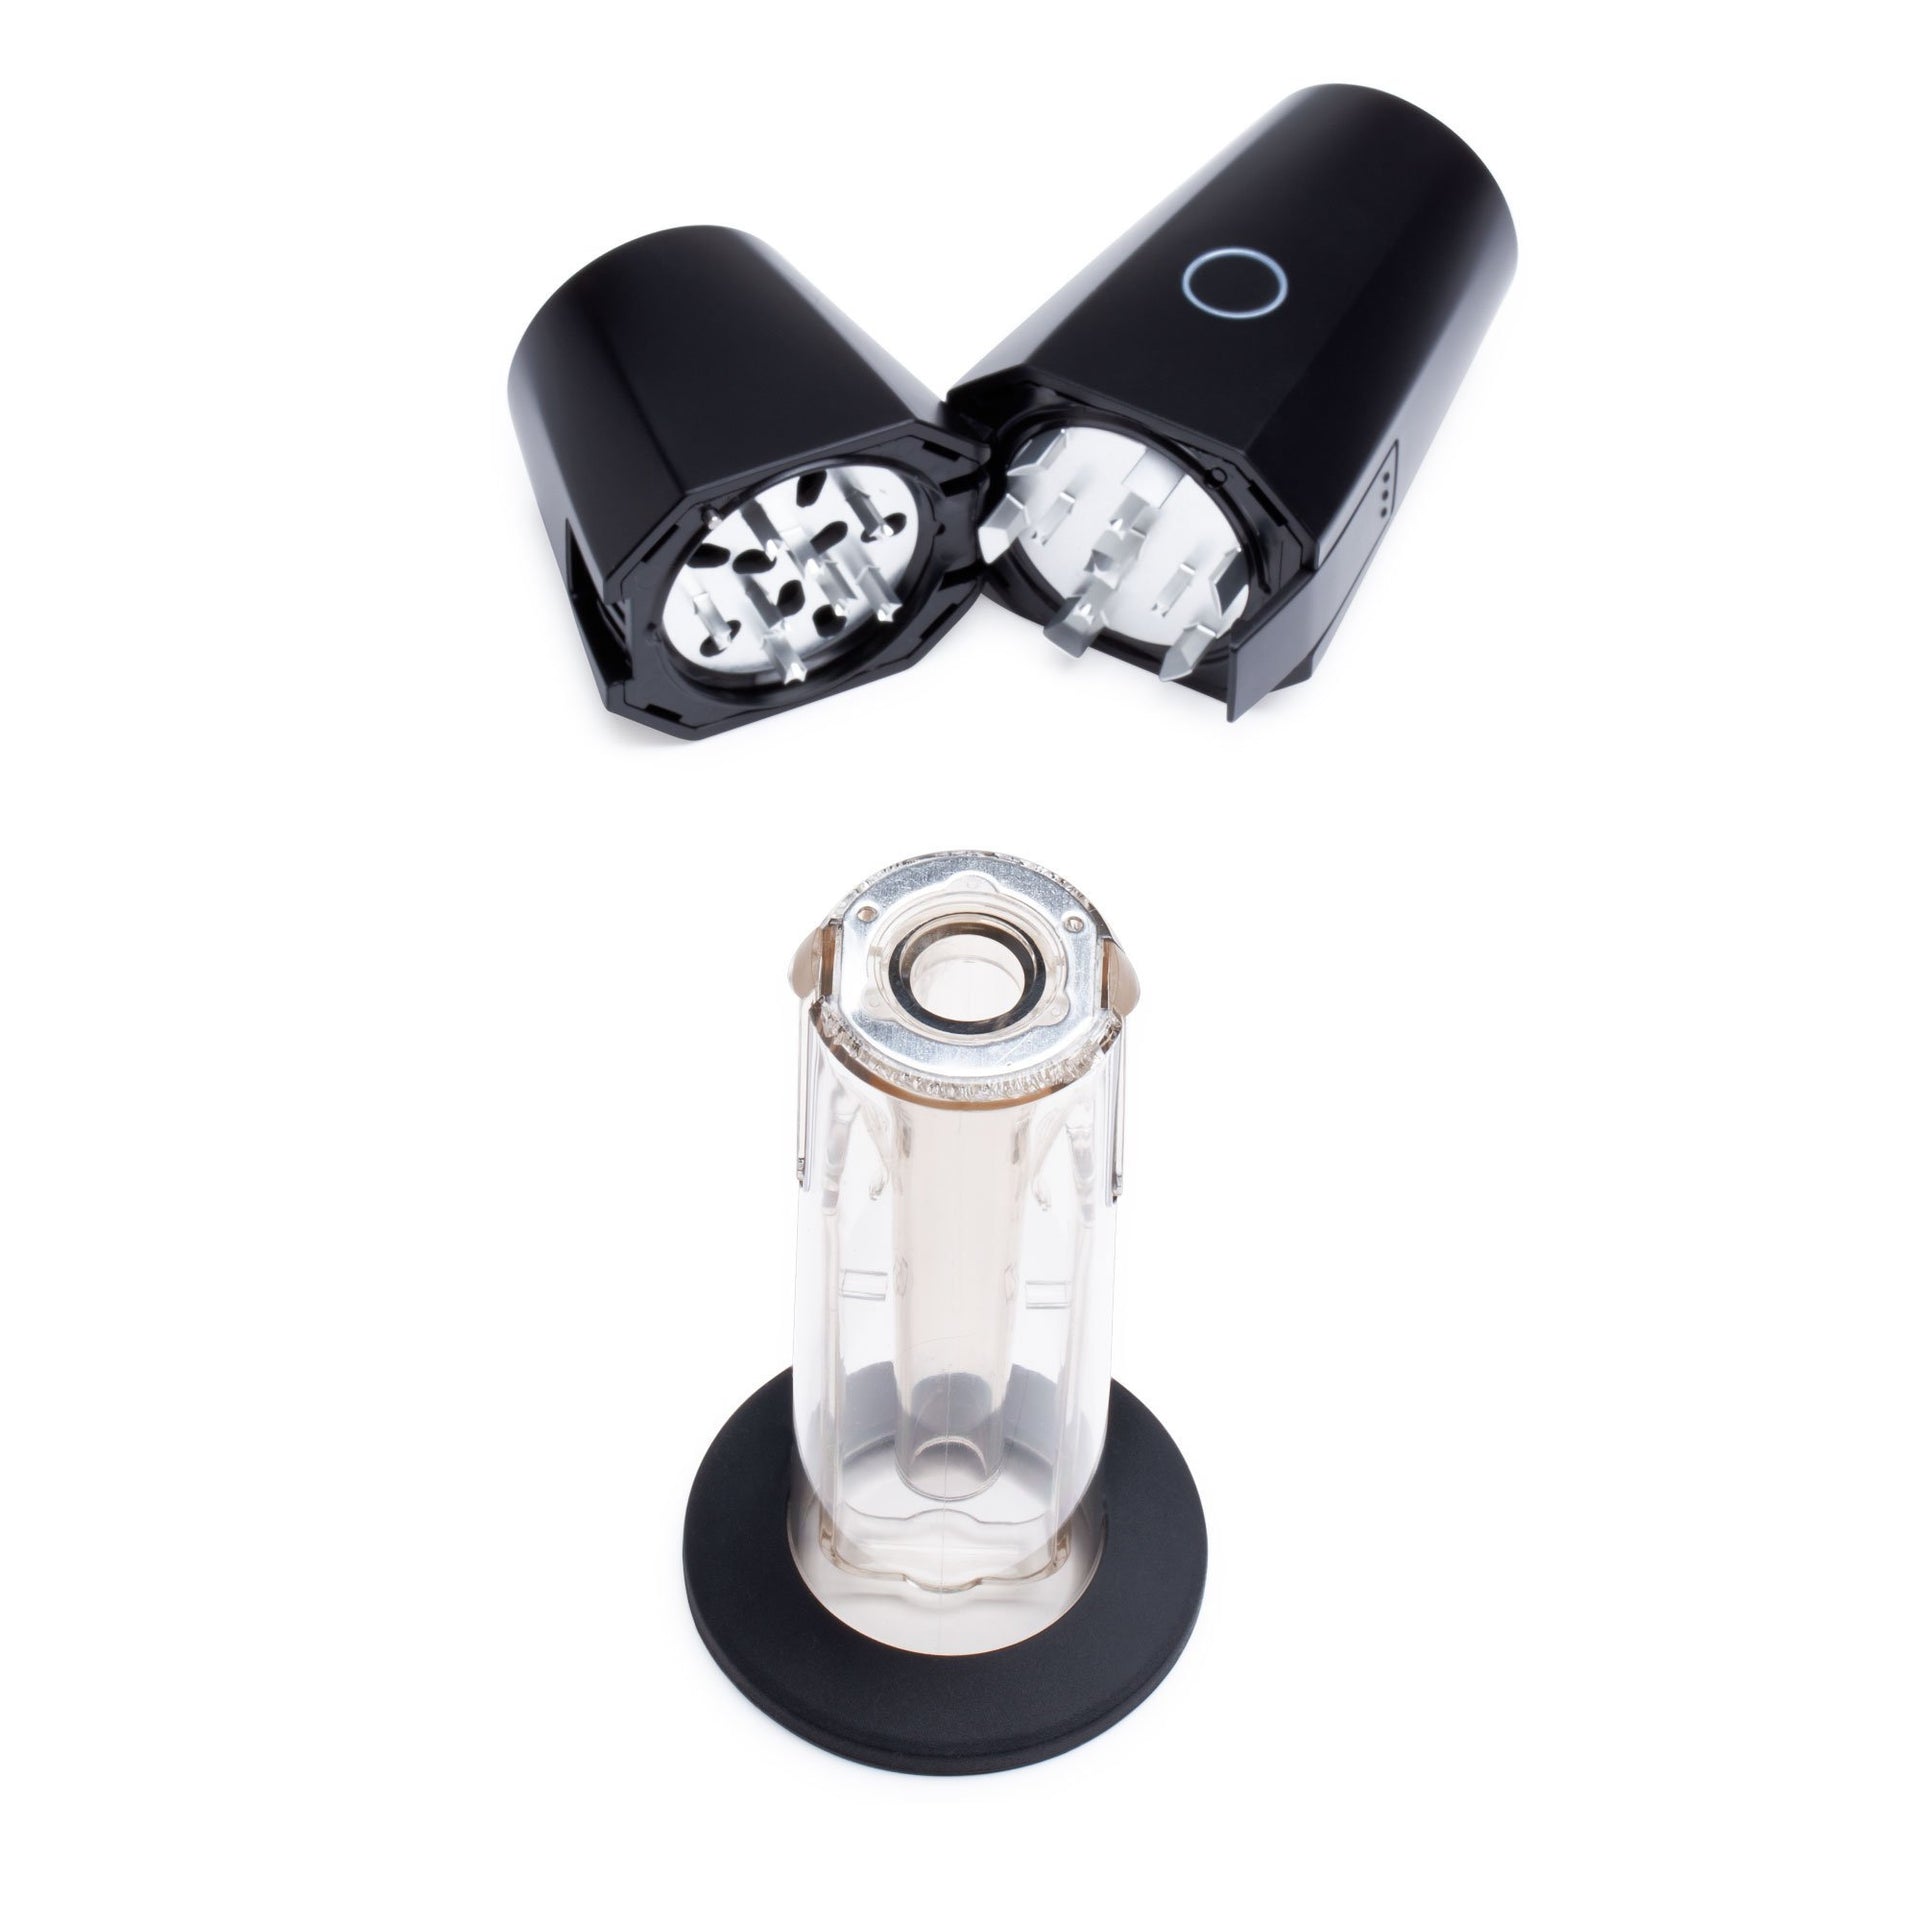 Electric Herb Grinder with Cone Filler (Green) – Boulder Bud Company